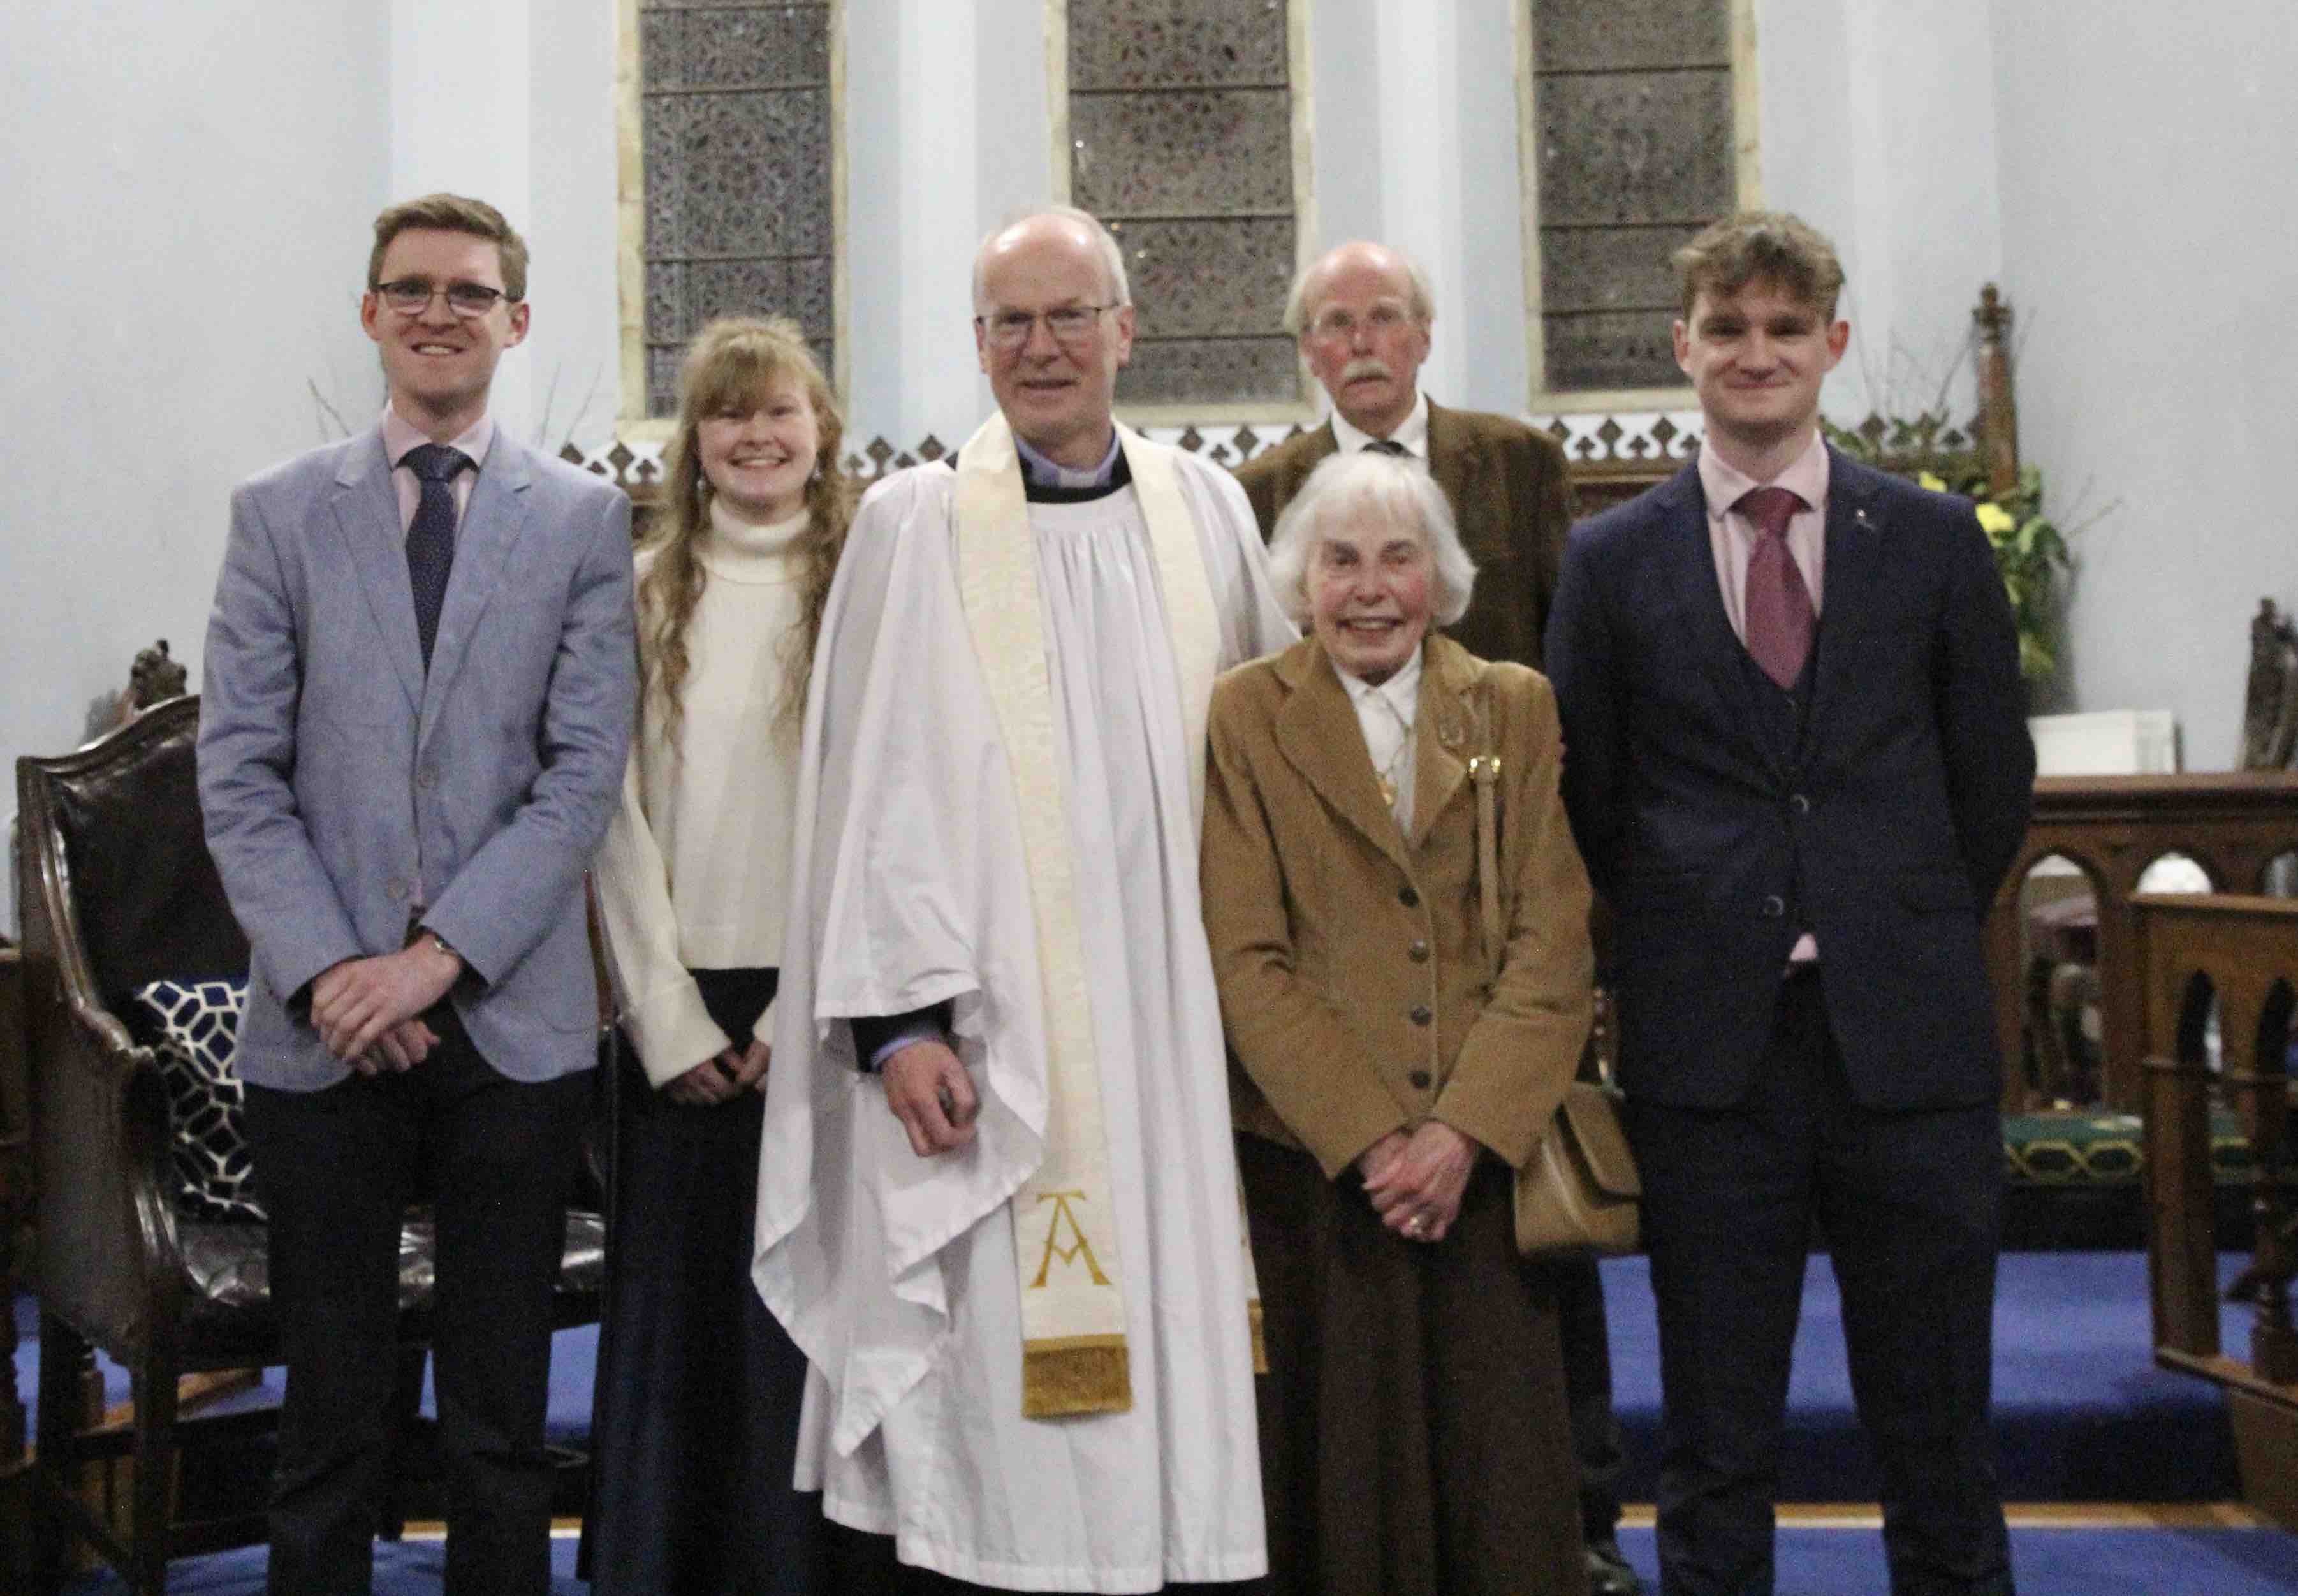 The Revd Niall Stratford and his children Nicholas, Robin and Amy, his mother Phyllis and brother Keith following his institution as Rector of Blessington Union.